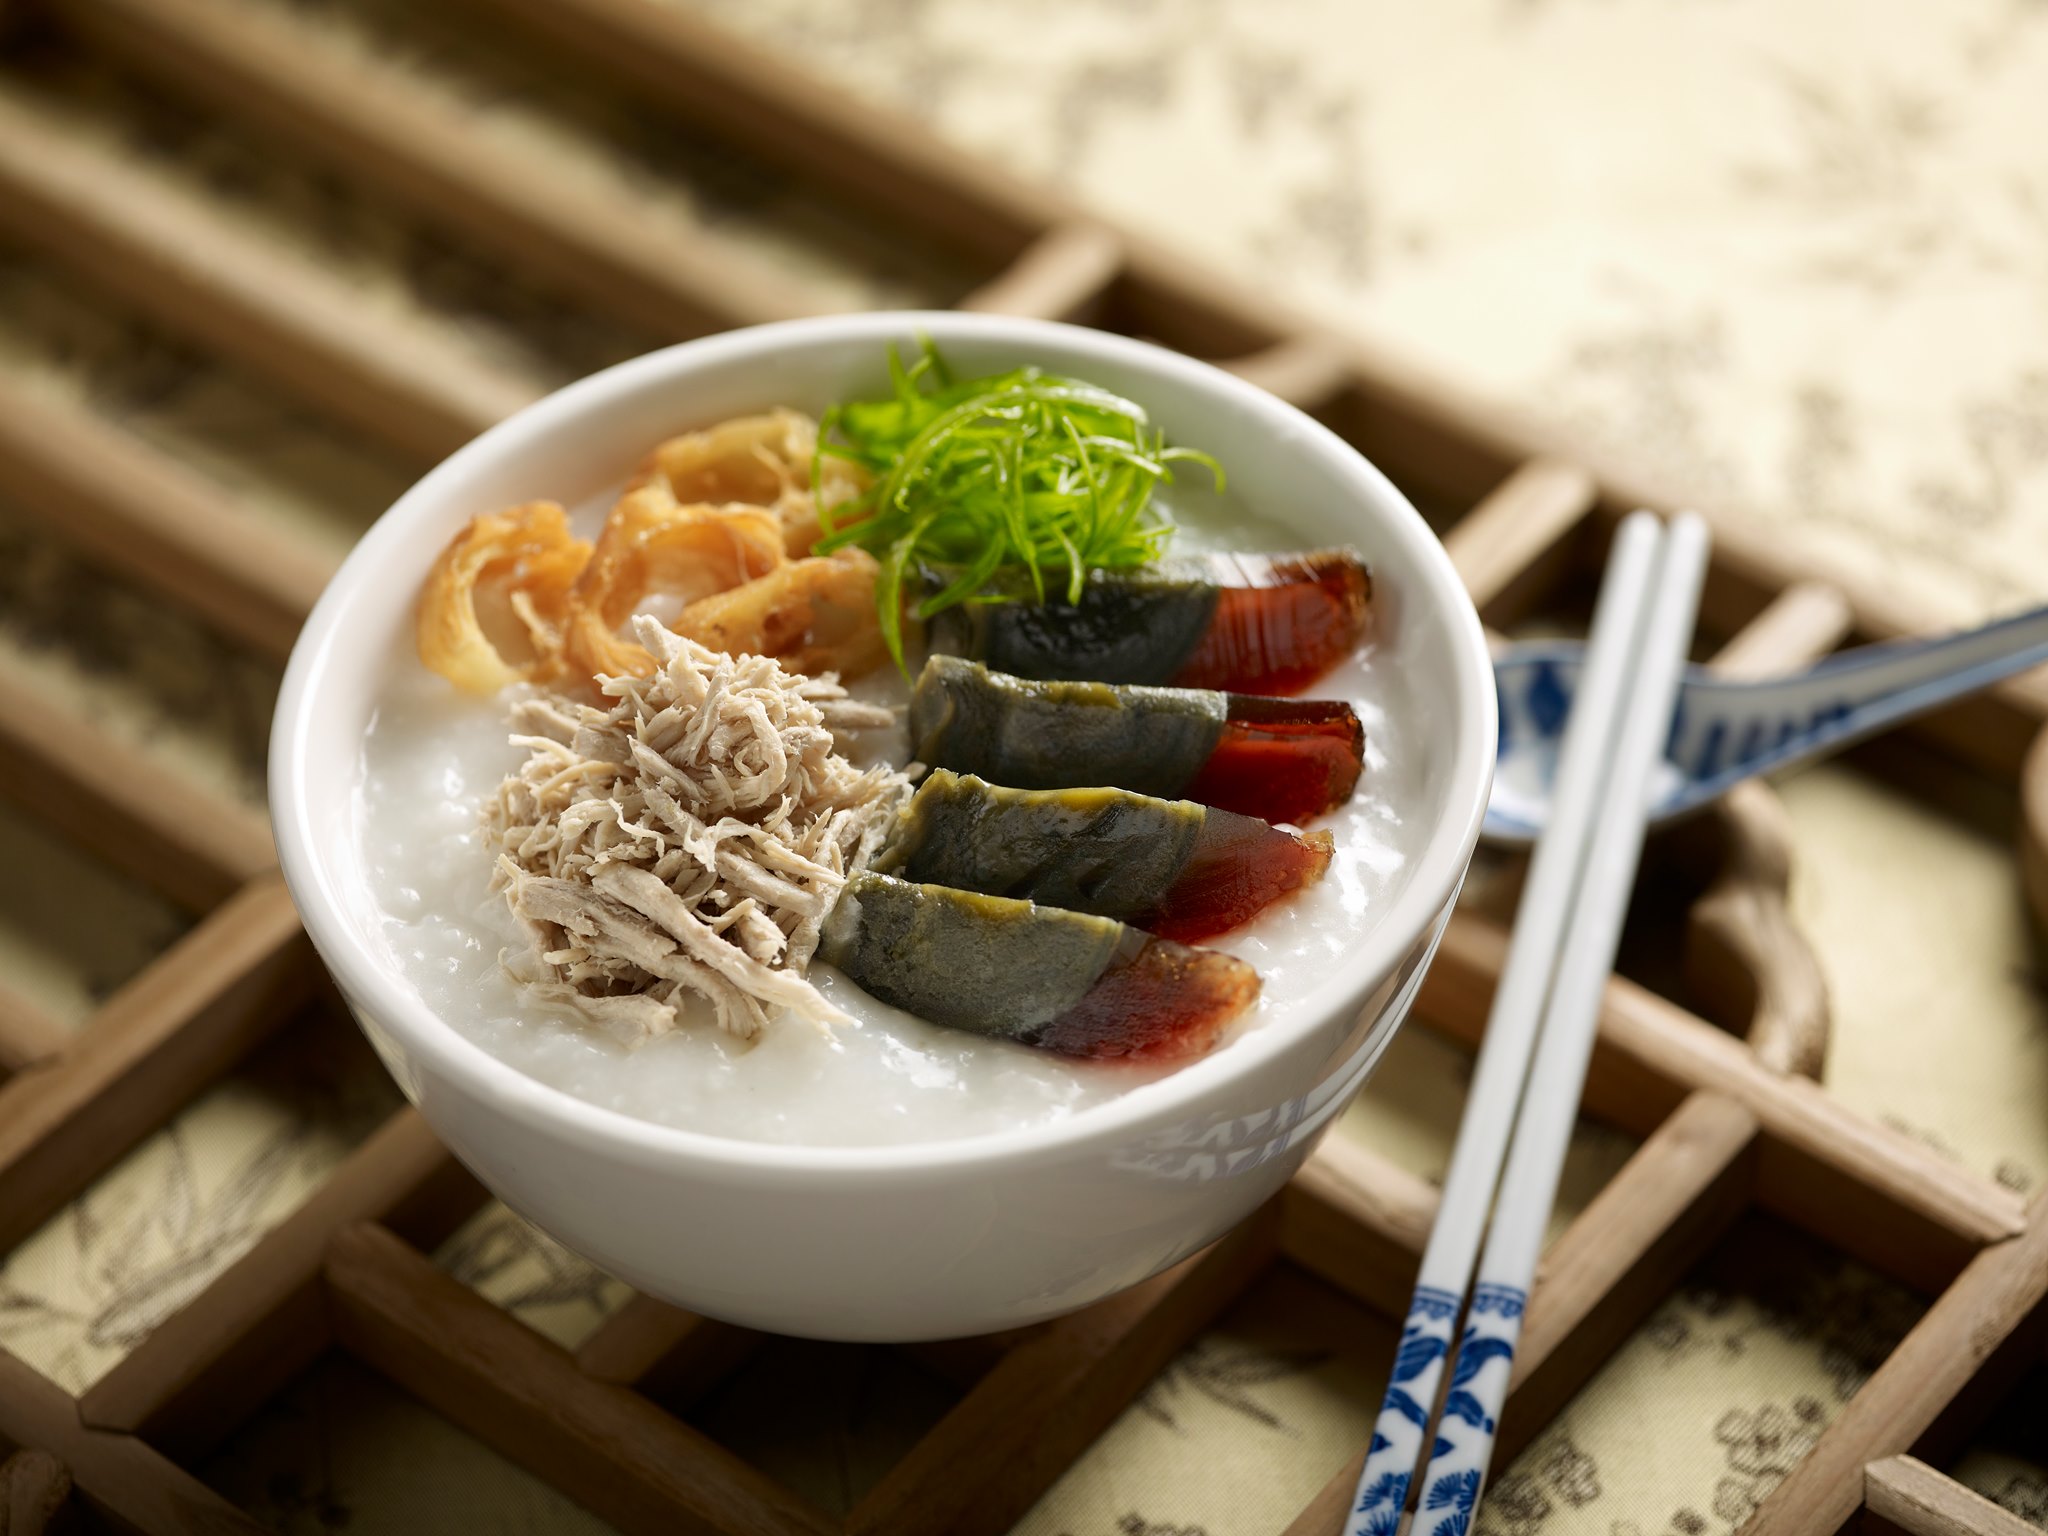 $19.90++ All-You-Can-Eat Dim Sum Buffet Promo at Soup Restaurant Changi Airport from 11 – 30 Nov 20 - 4